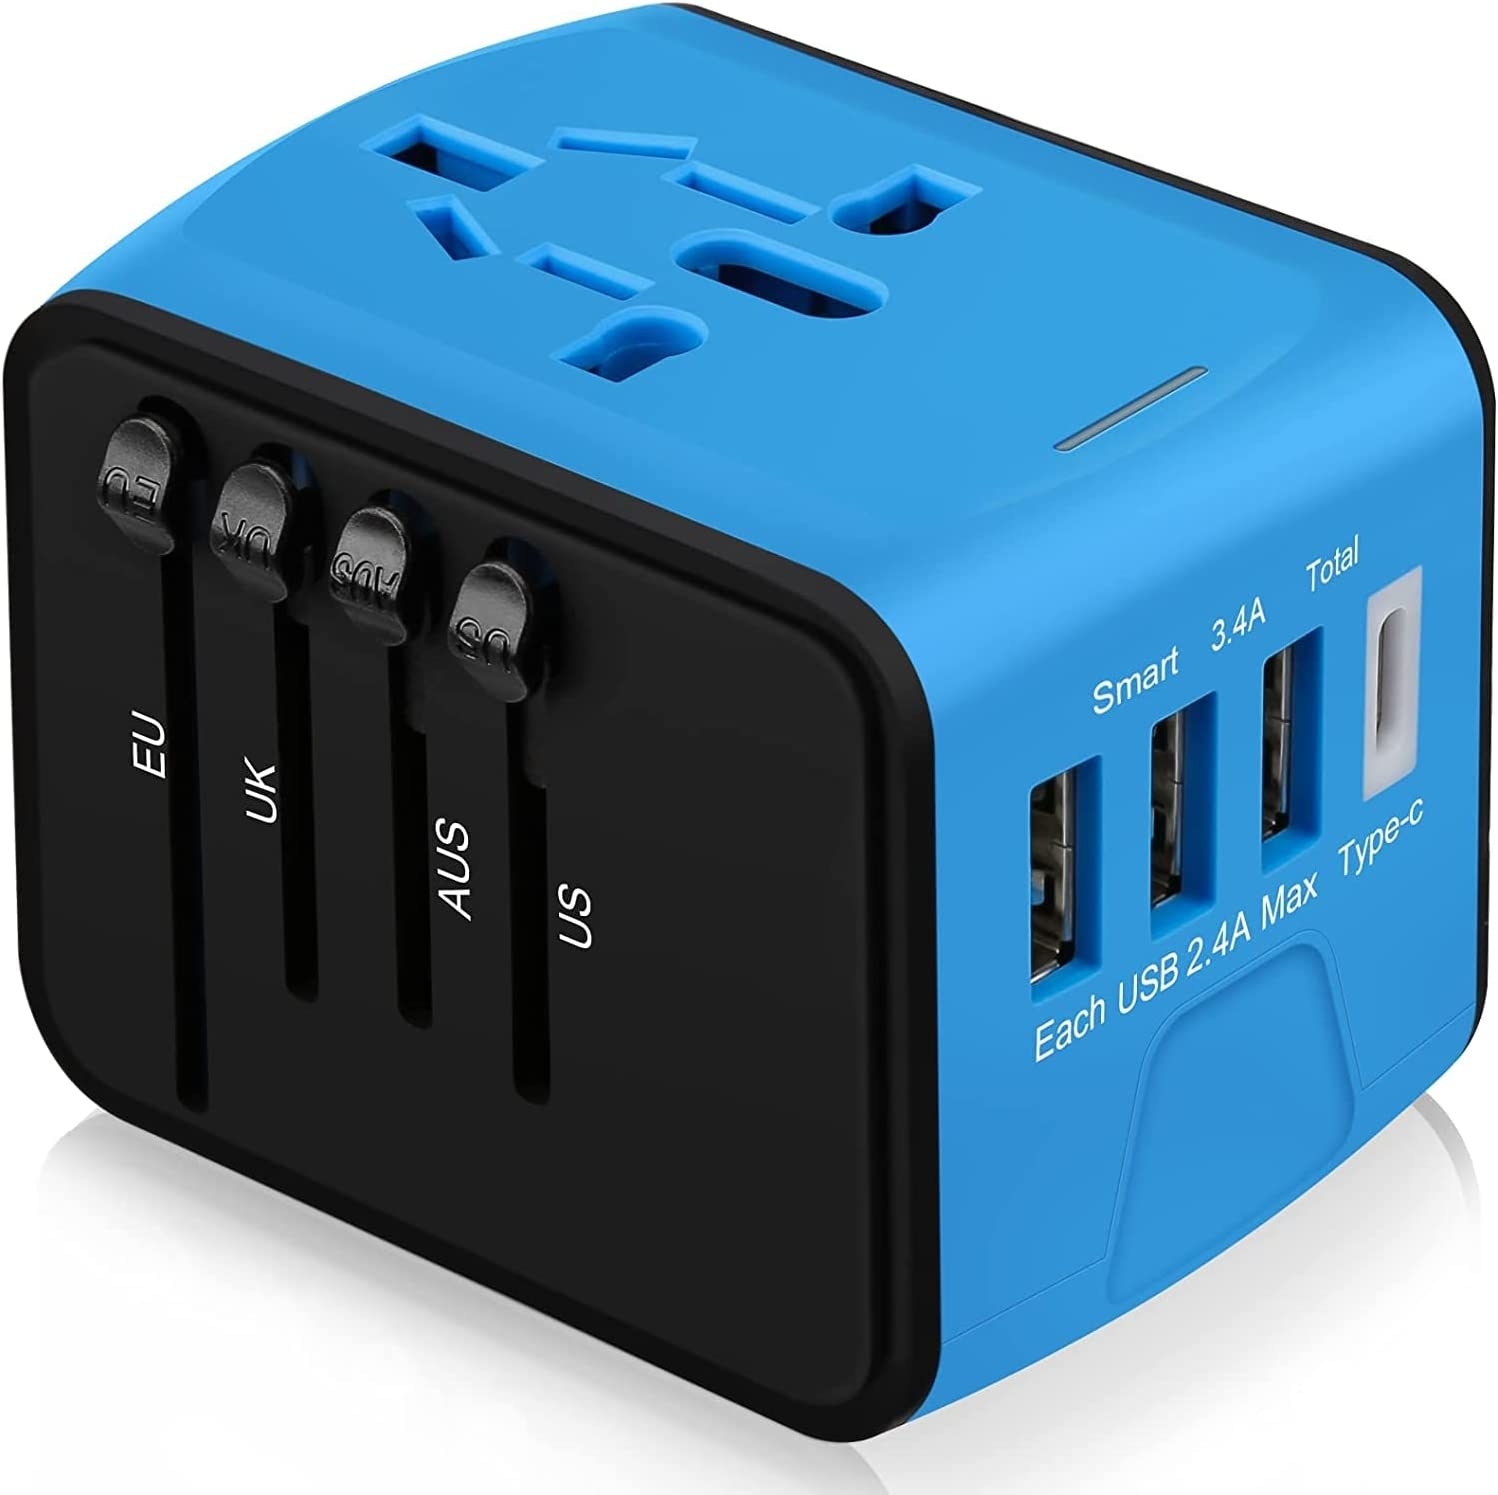 the cube power adapter with tons of slots on each side